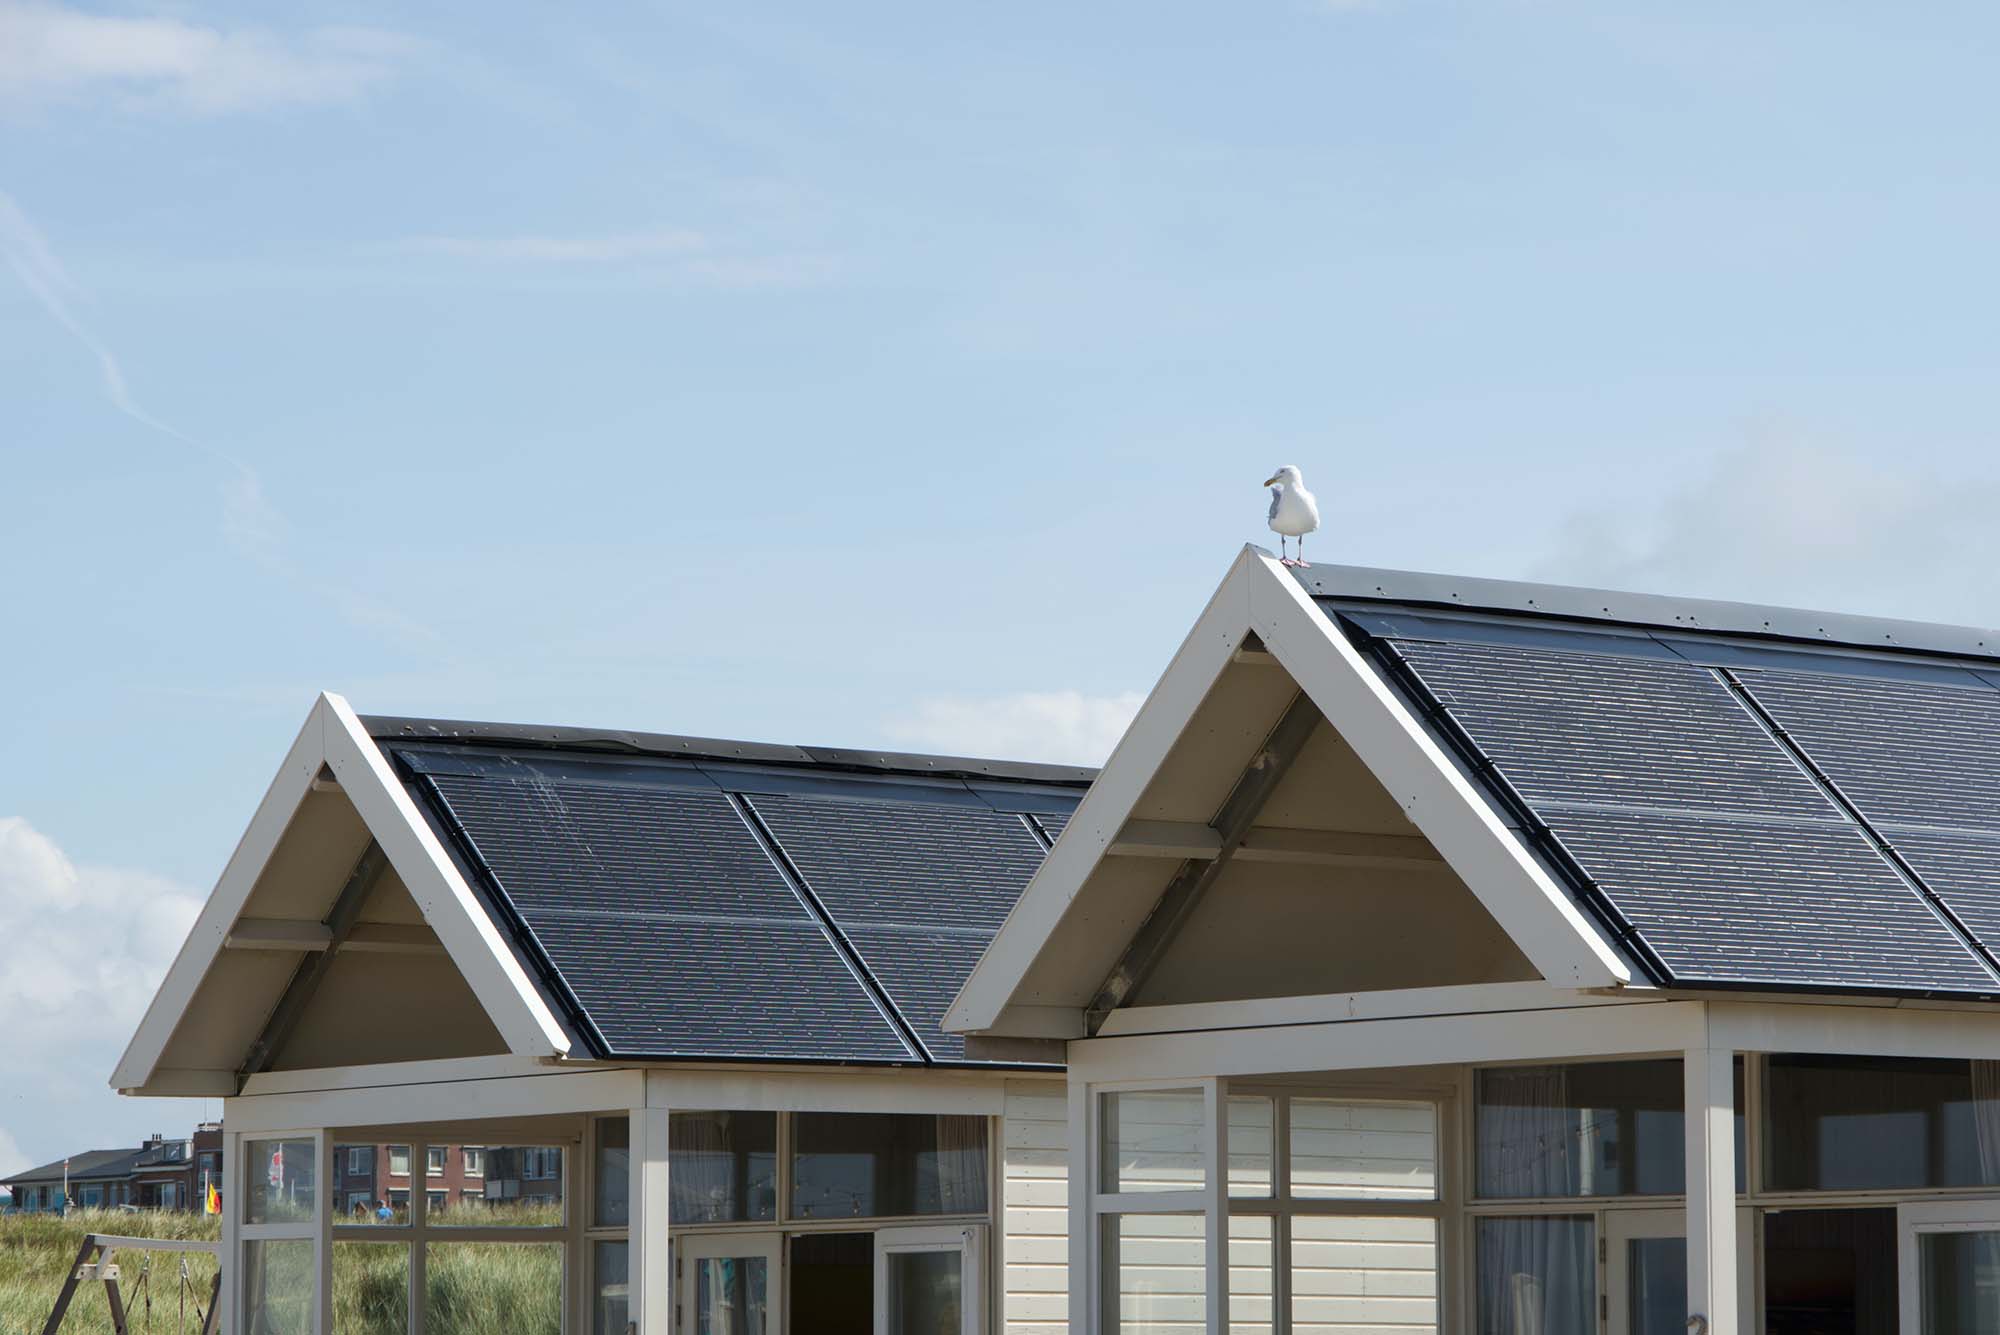 How You Can Make Your Solar Panel Installation Blend In with Your Home